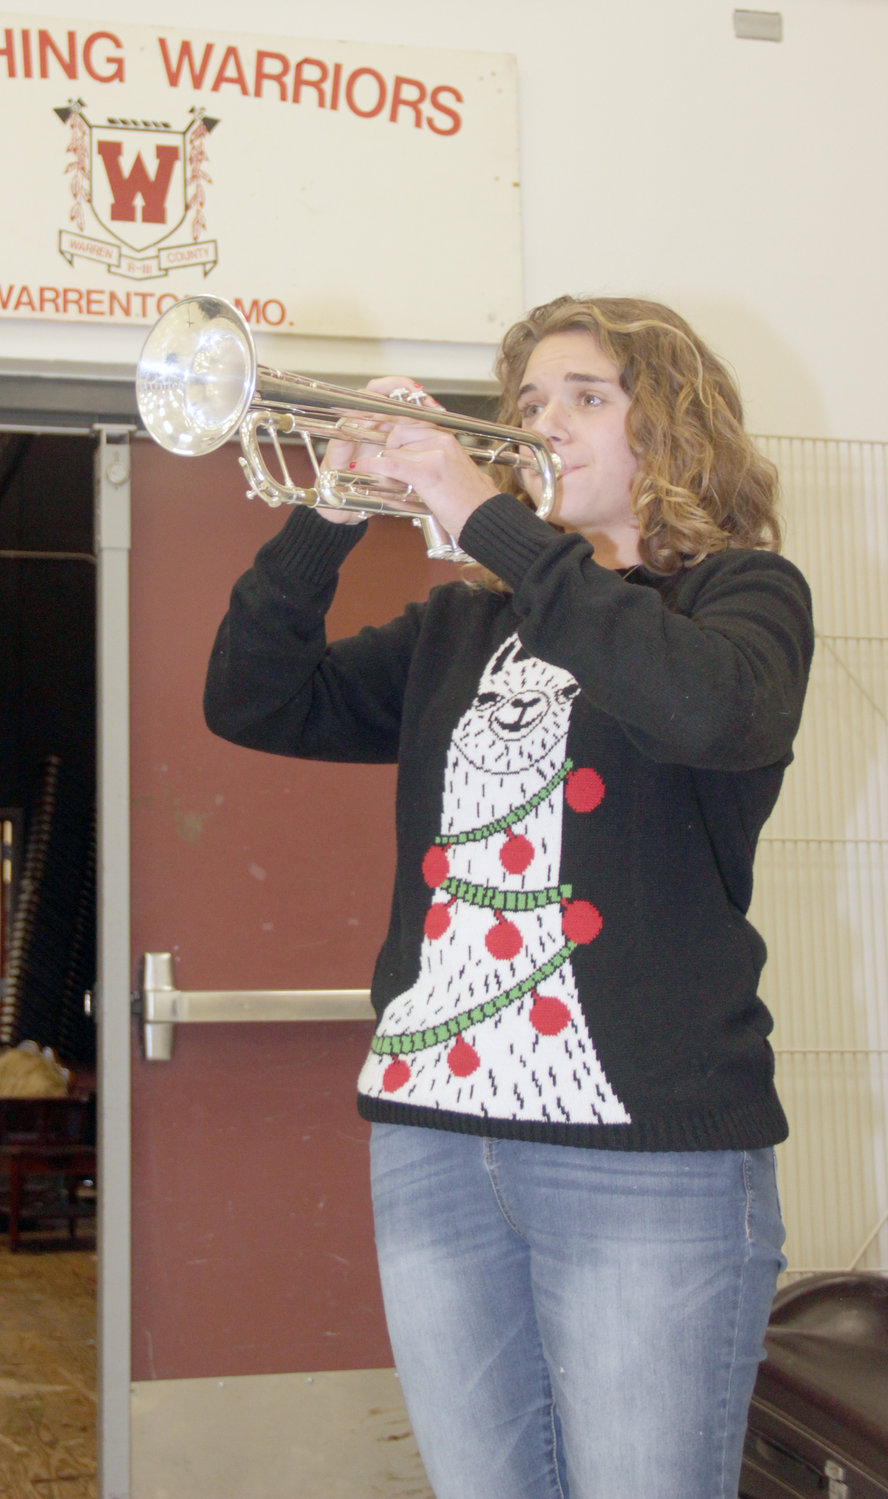 MUSIC DEDICATION — Warrenton High School junior Shelbi Tittel rehearses the Warrenton Marching Band’s fight song in the school’s band room in December. After months of practice, Tittel was selected as one of only 108 performers in the Missouri All-State Band, which will perform this month.